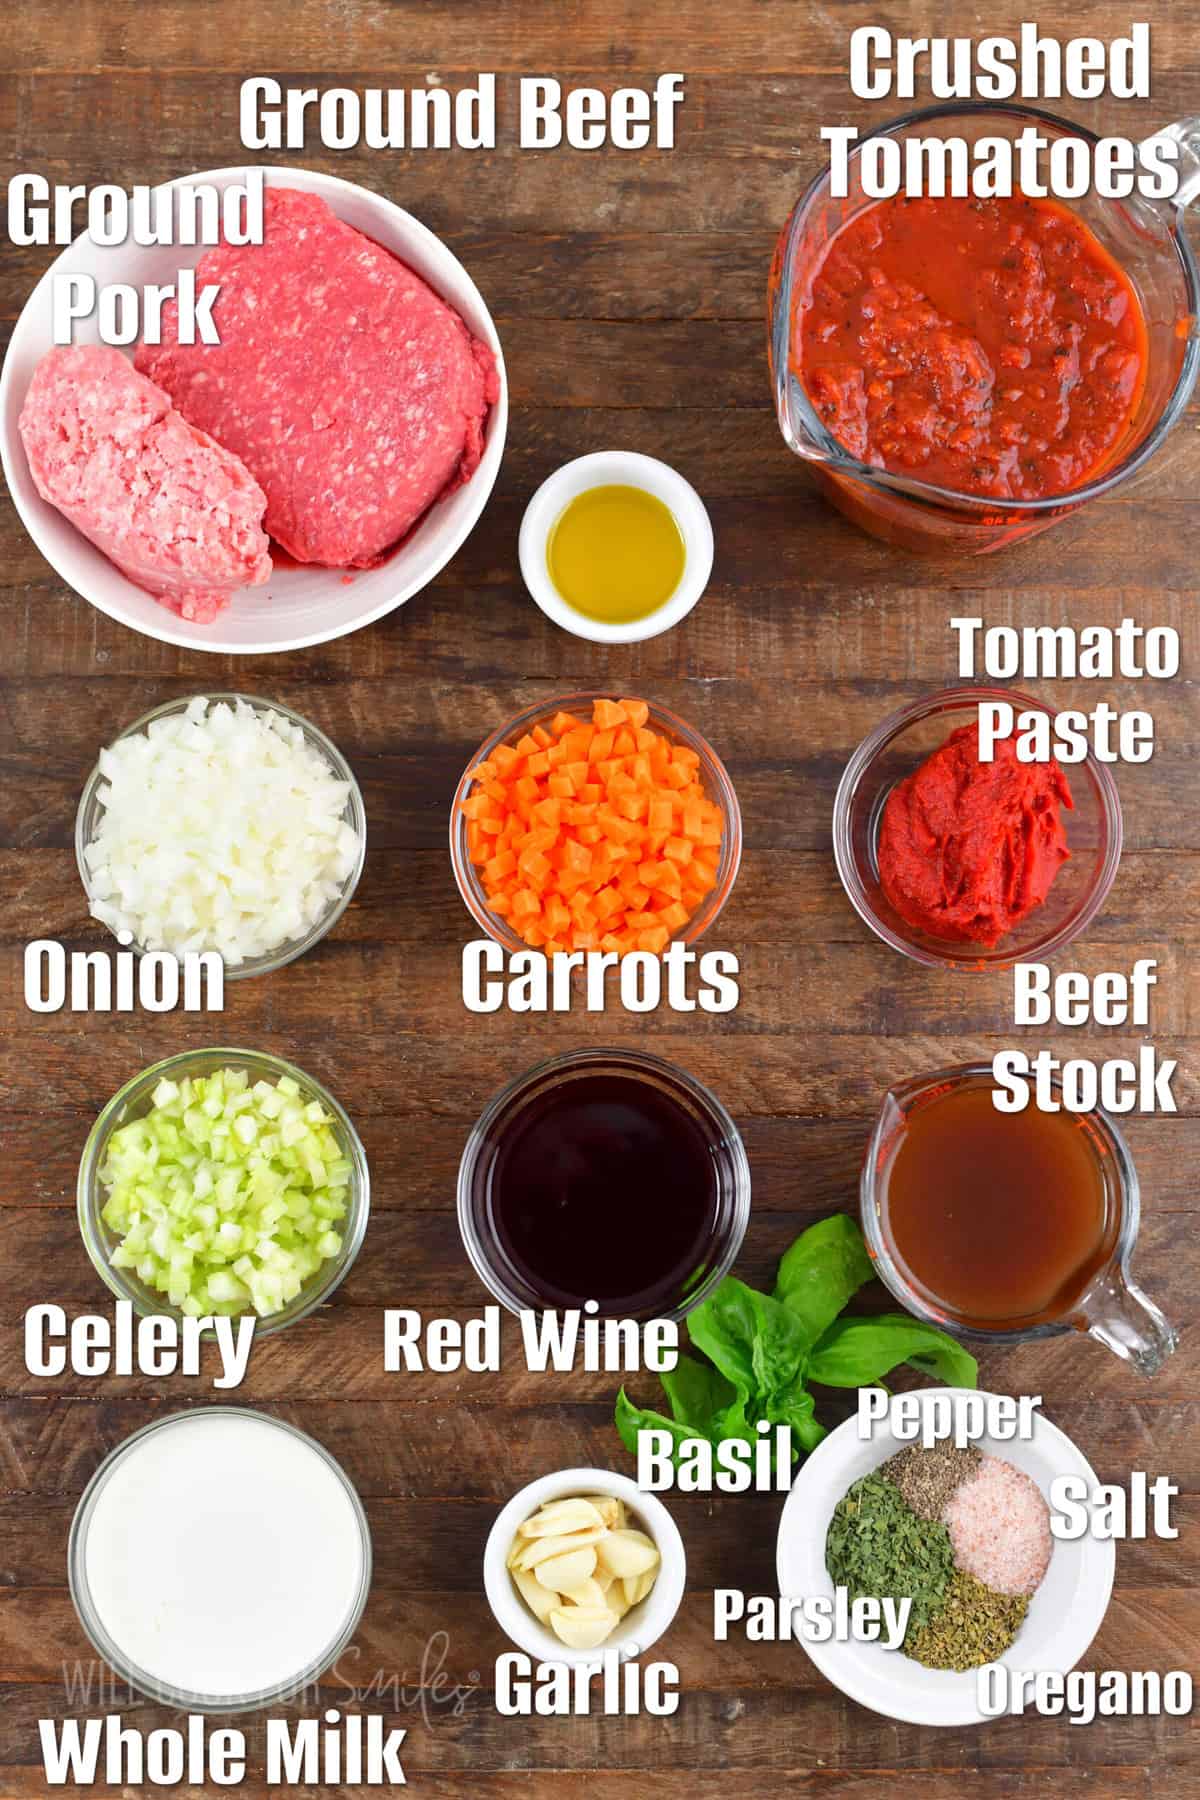 labeled ingredients to make Bolognese sauce on the wooden board.